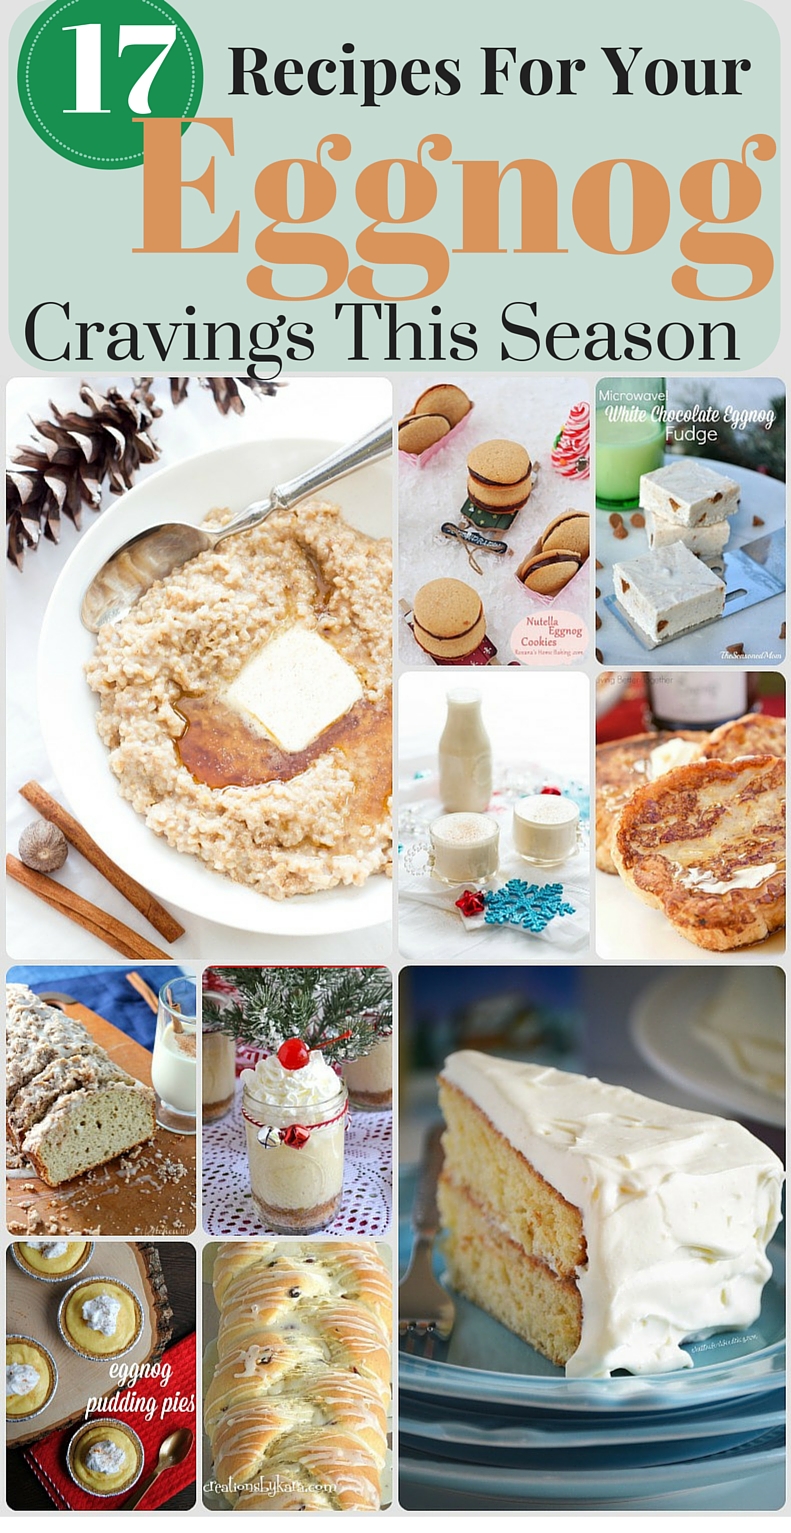 For you Eggnog lovers out there! 17 of the most delicious eggnog recipes! My husband is going to love me!